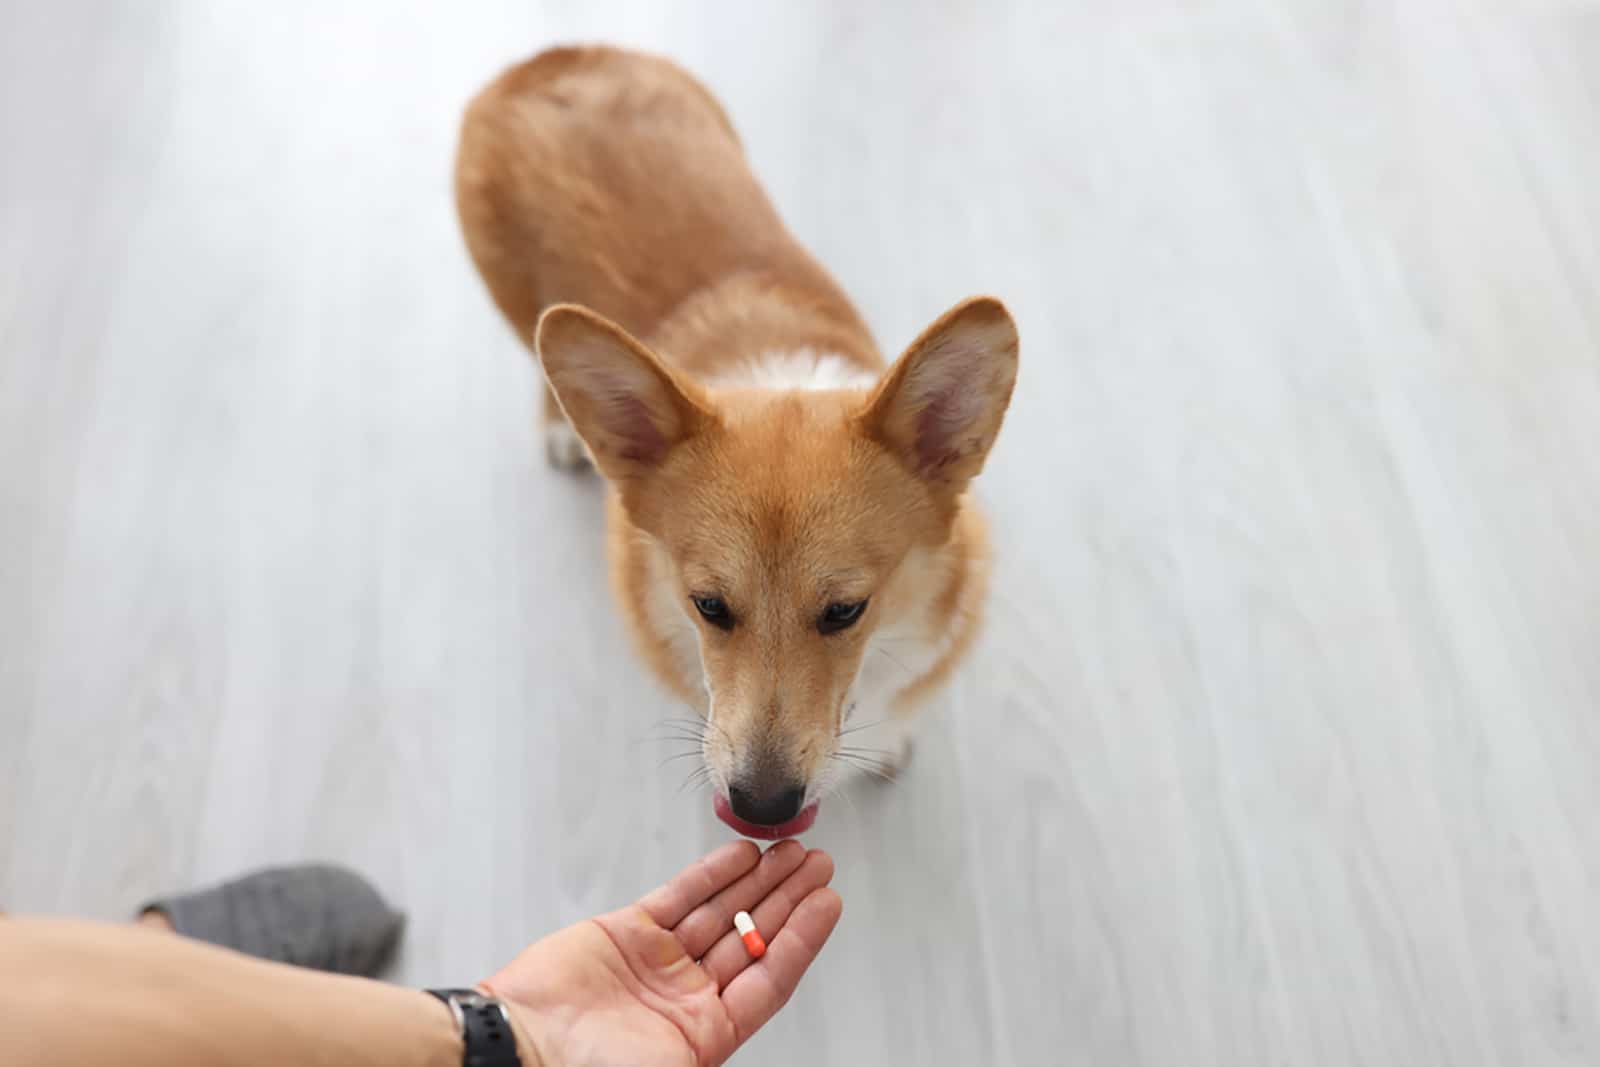 corgi taking dog supplement from the owner's hand